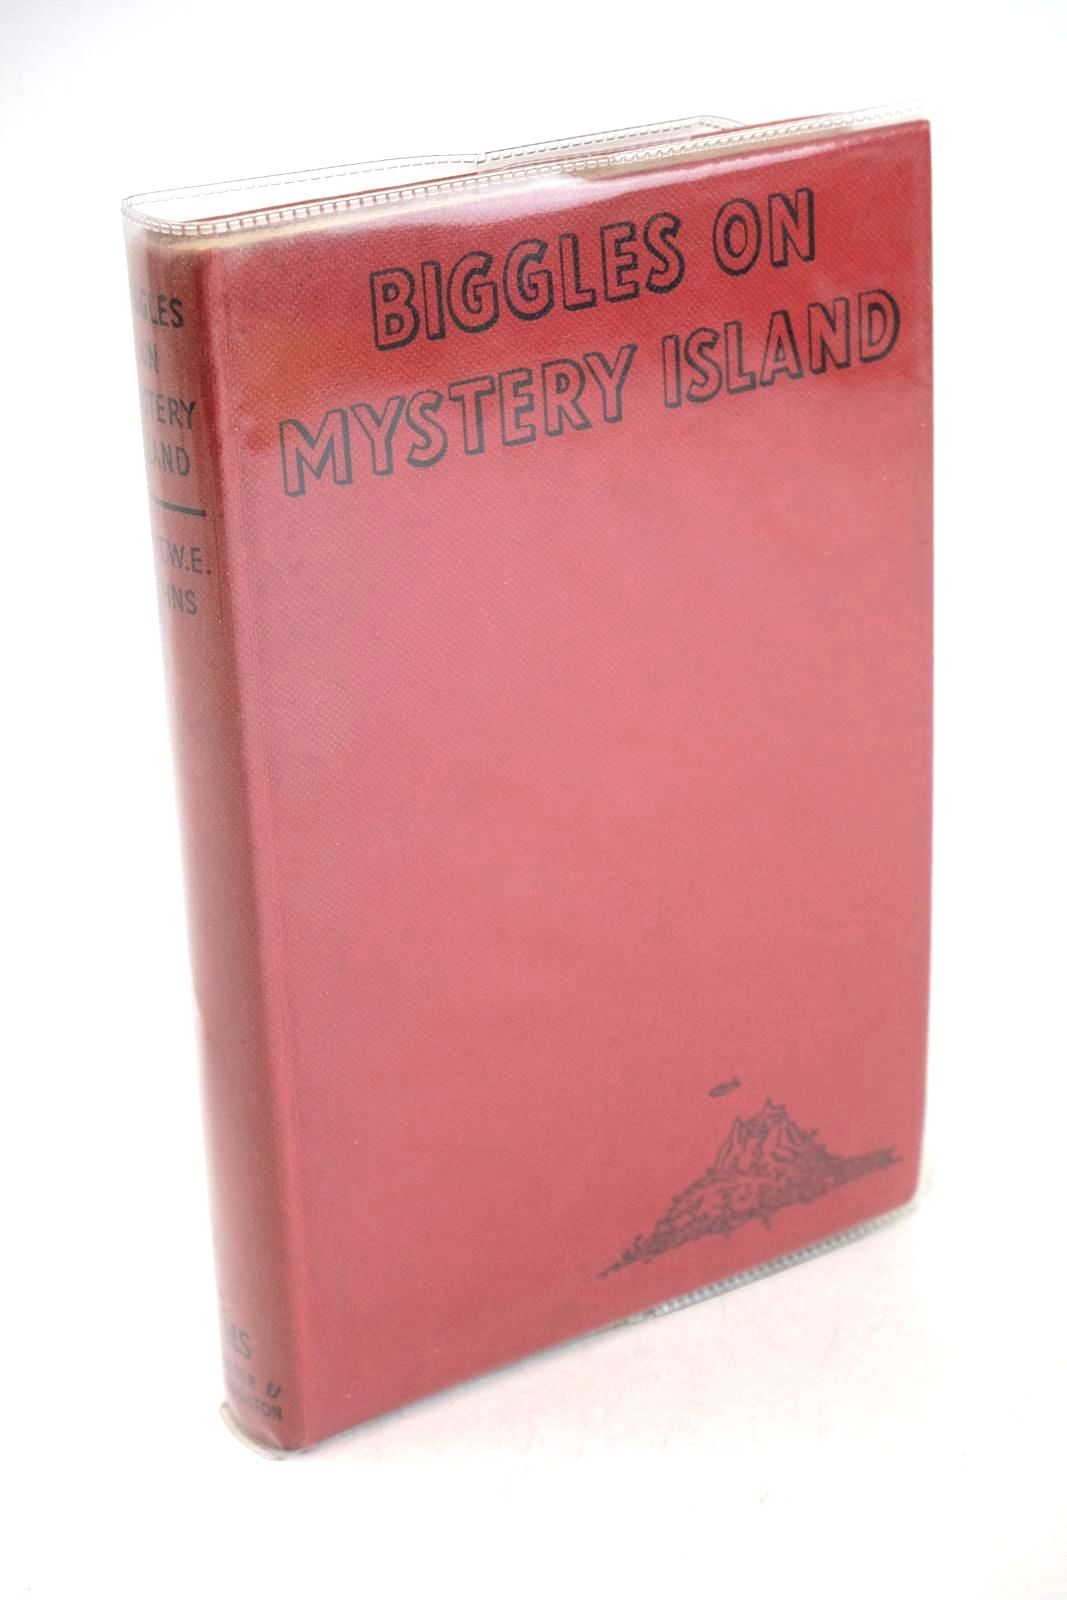 Photo of BIGGLES ON MYSTERY ISLAND written by Johns, W.E. illustrated by Stead,  published by Hodder &amp; Stoughton (STOCK CODE: 1326557)  for sale by Stella & Rose's Books